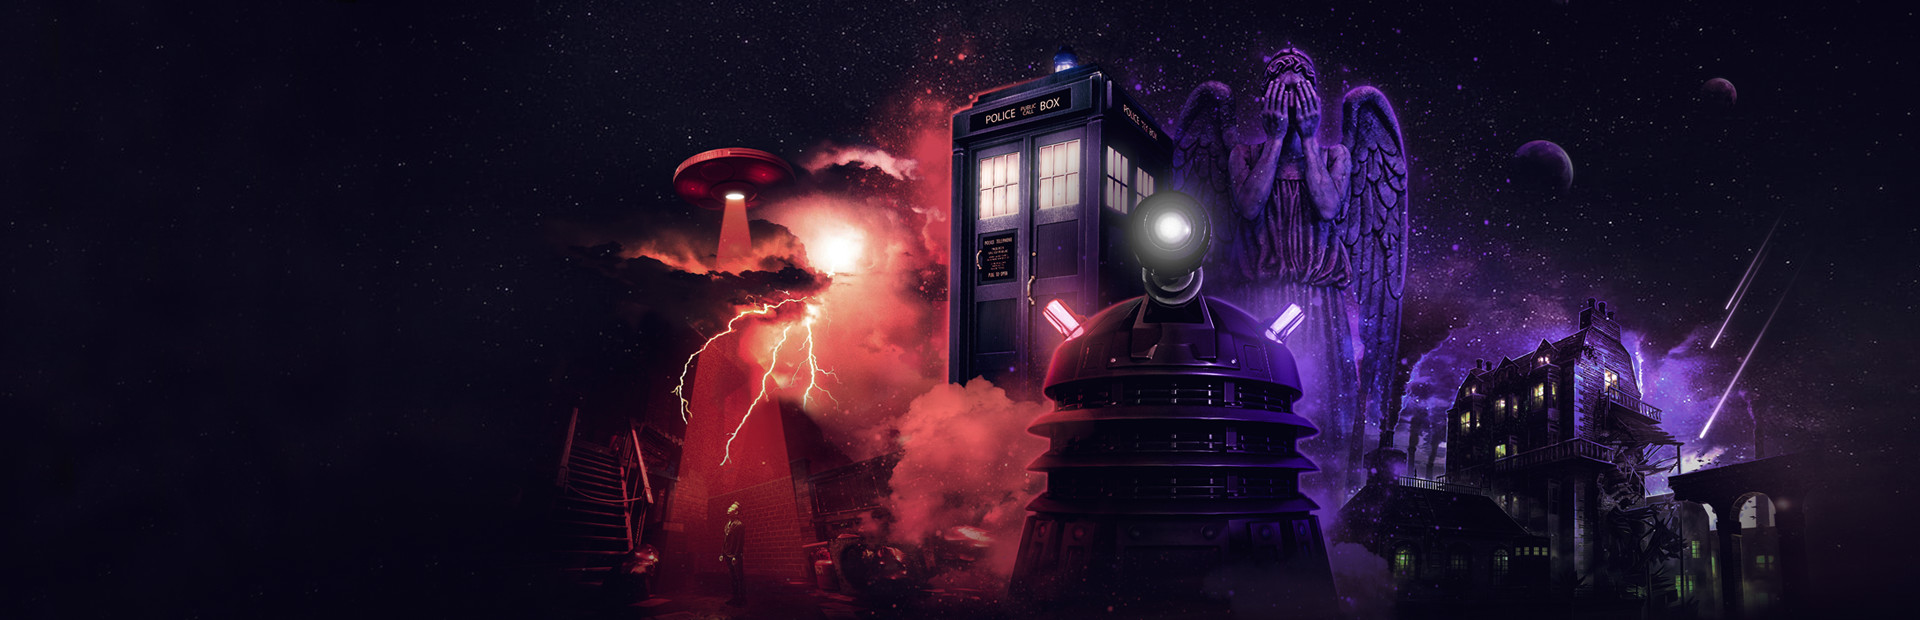 Doctor Who: The Edge Of Time cover image